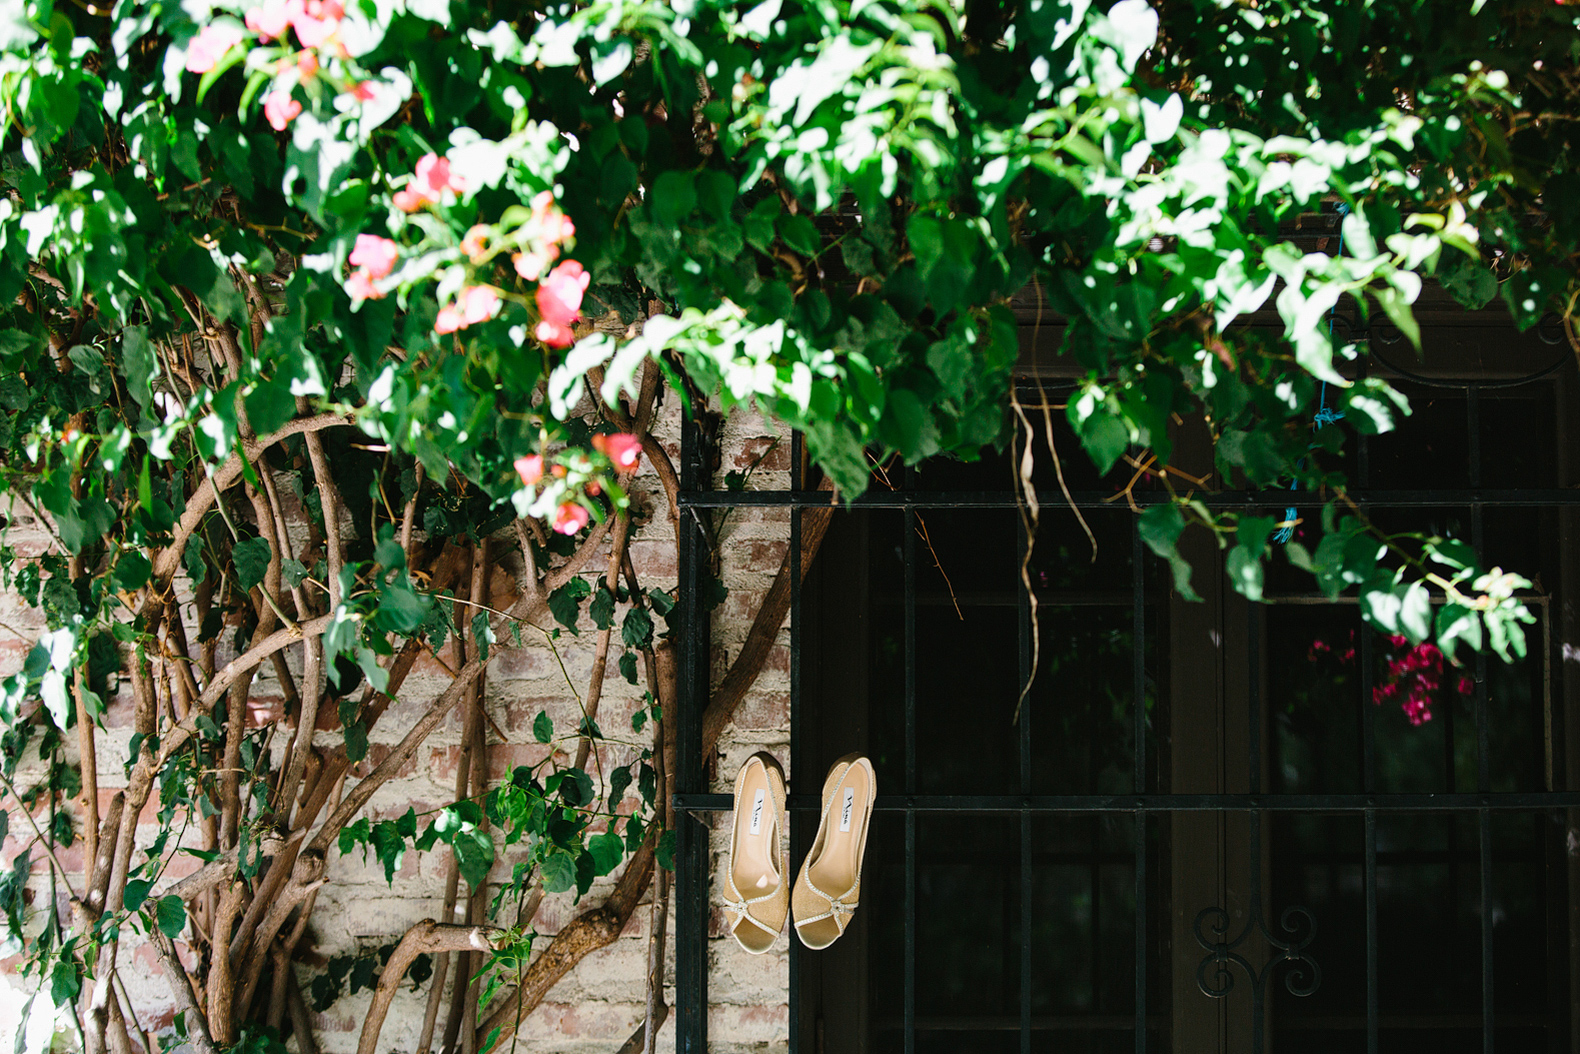 The bride's shoes hanging on a gate. 